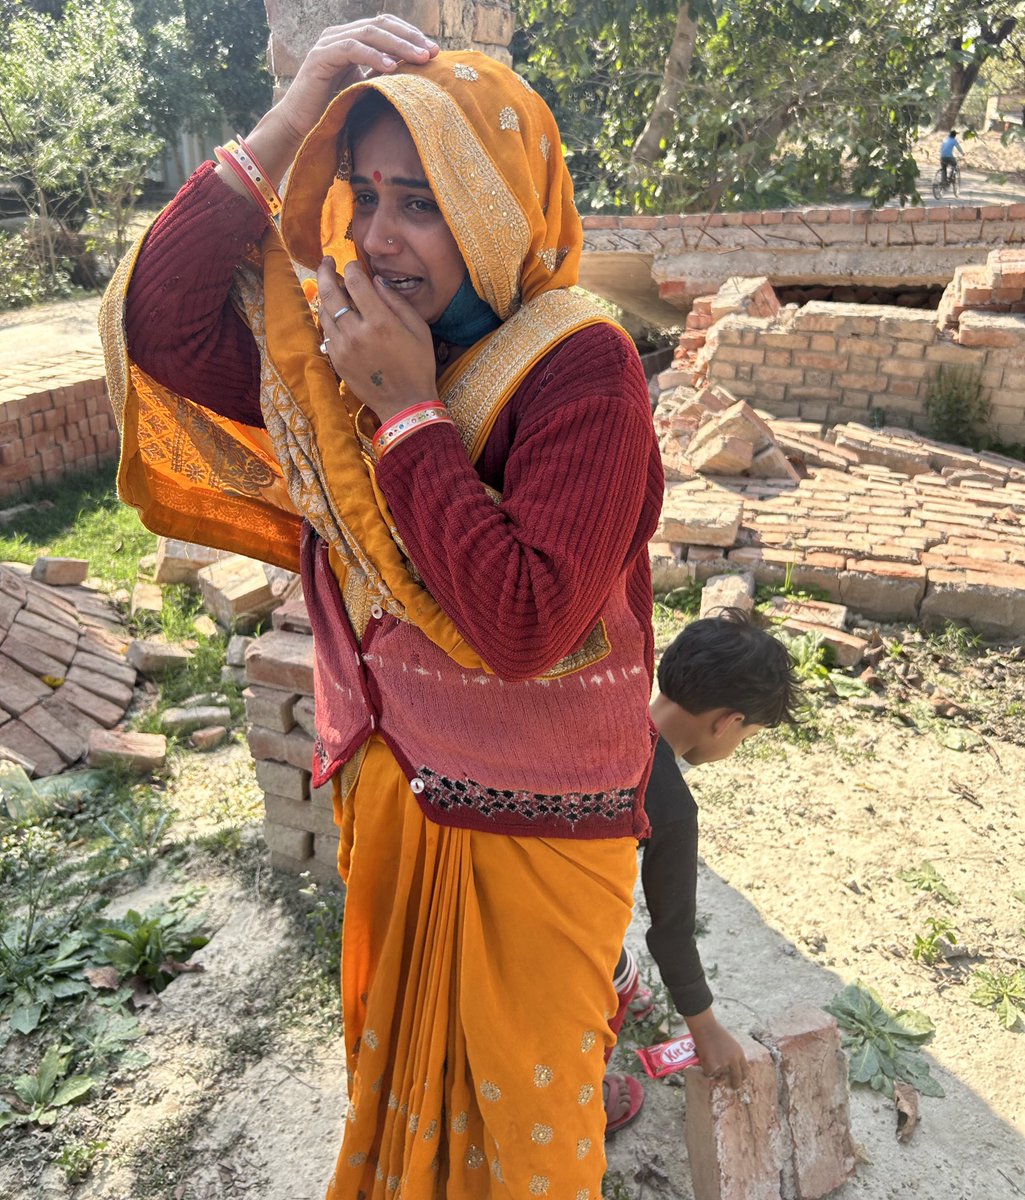 She is Sandhya Pandey whose house was first constructed under PMAY and then demolished by the UP administration. She has now no place to stay. See how her five-year-old daughter is cleaning the debris so that she can live there. MP @smritiirani is not helping so as a community